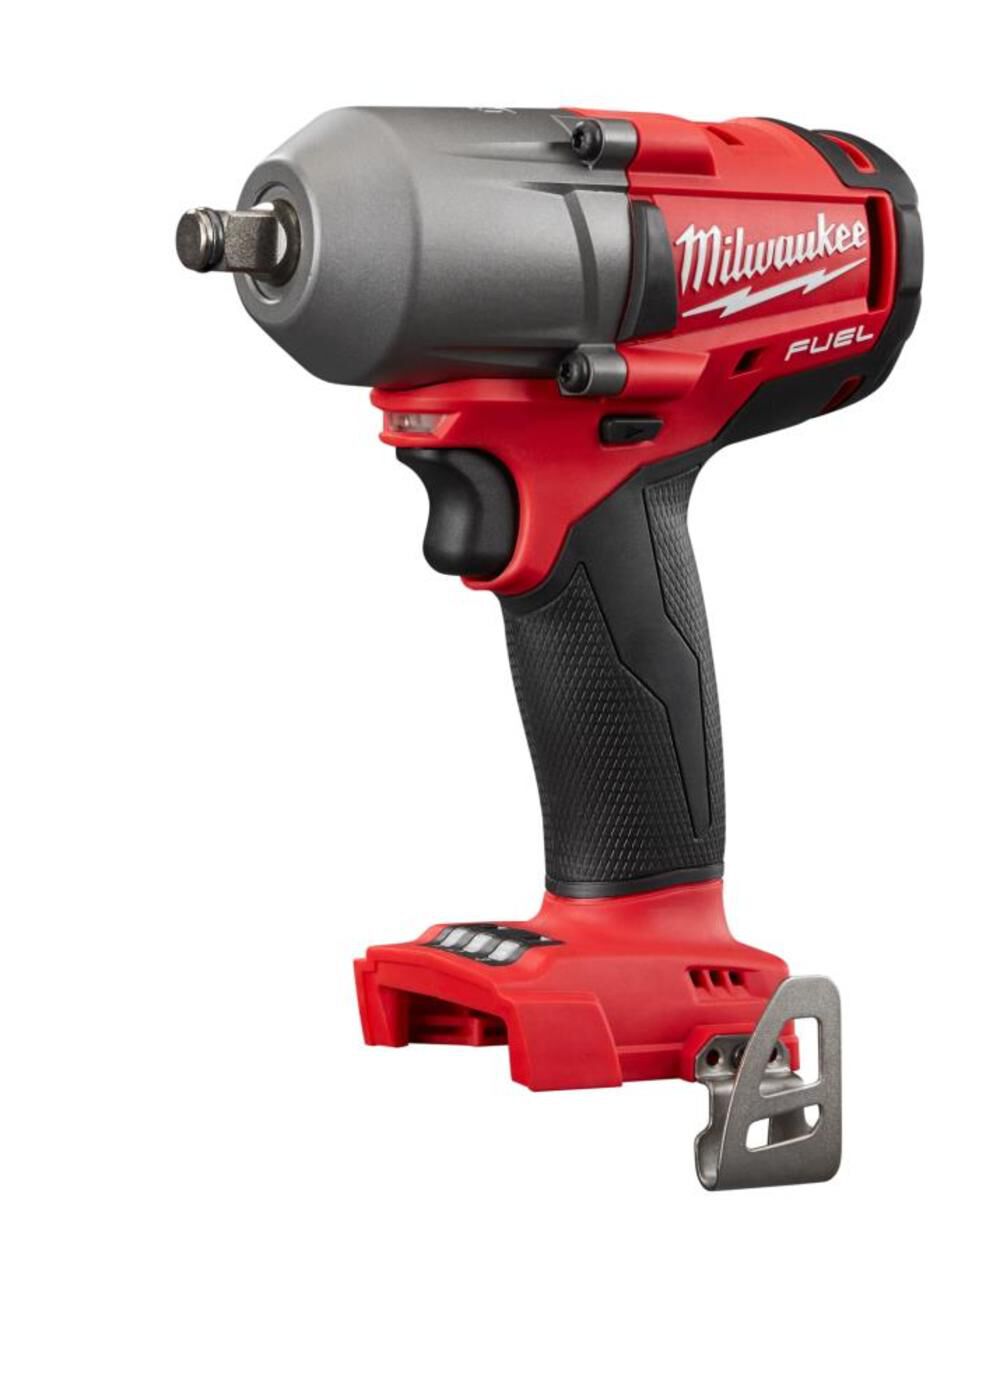 Milwaukee M18 FUEL Mid-Torque Impact Wrench 1/2 in. Friction Ring